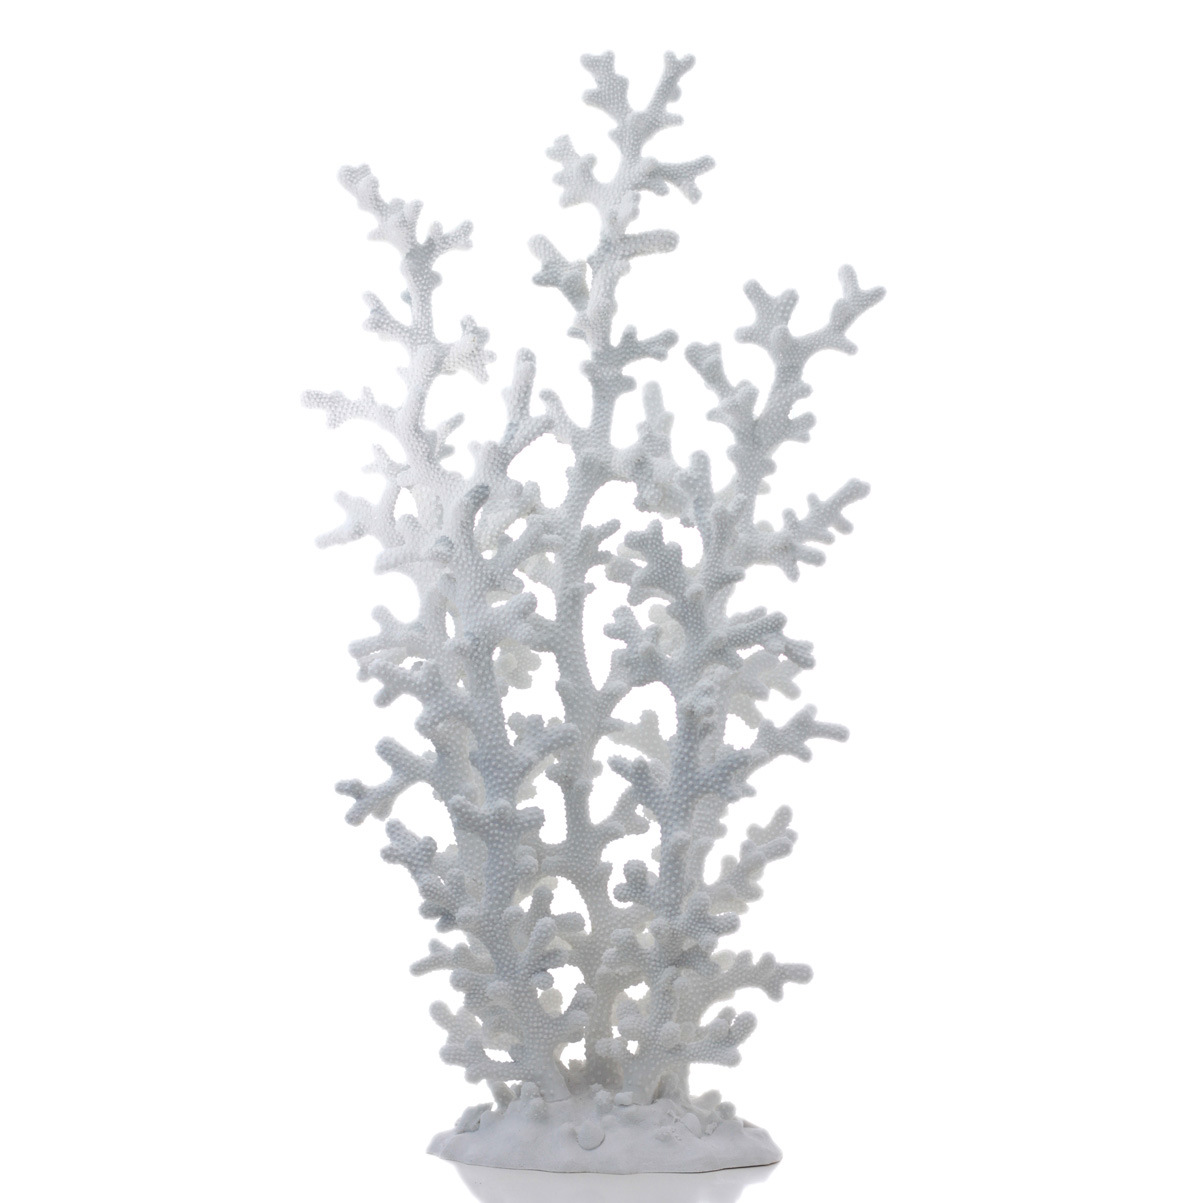 Coral Shape Statue/ Coral Shape Figurine for Home or Hotel Decoration